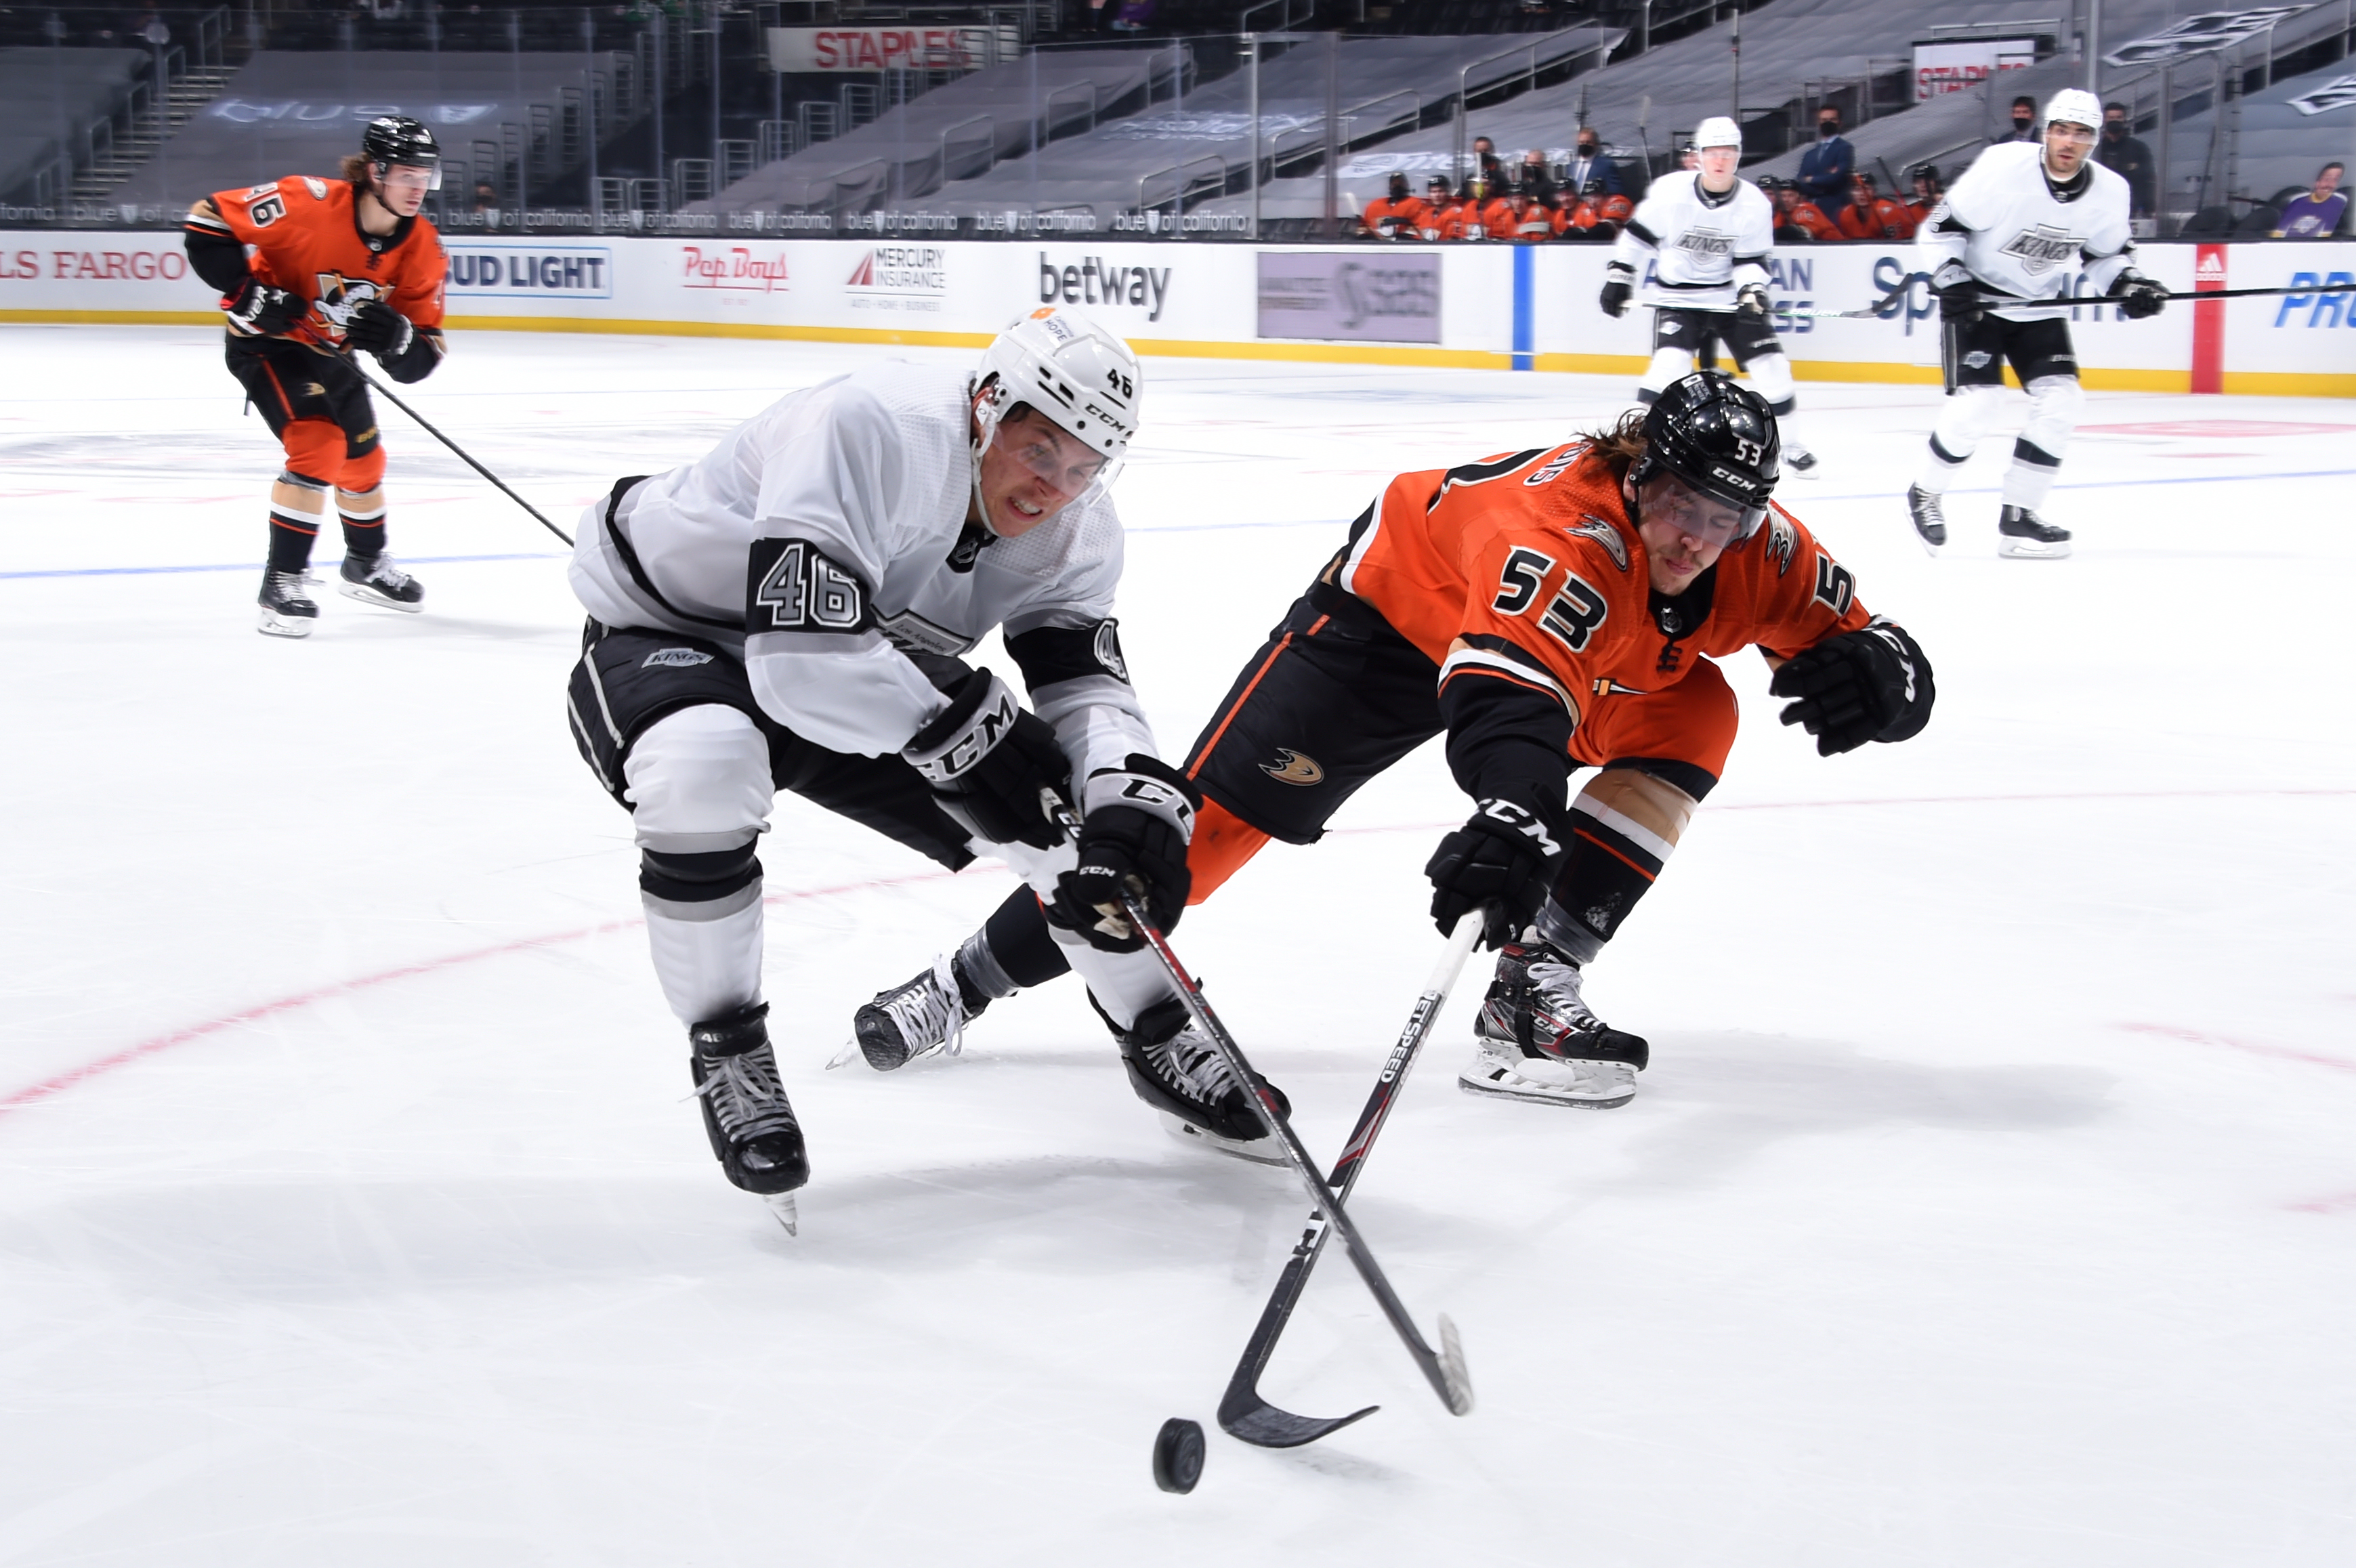 #46 of the Los Angeles Kings and Max Comtois #53 of the Anaheim Ducks battle for the puck during the second period at STAPLES Center on April 28, 2021 in Los Angeles, California.